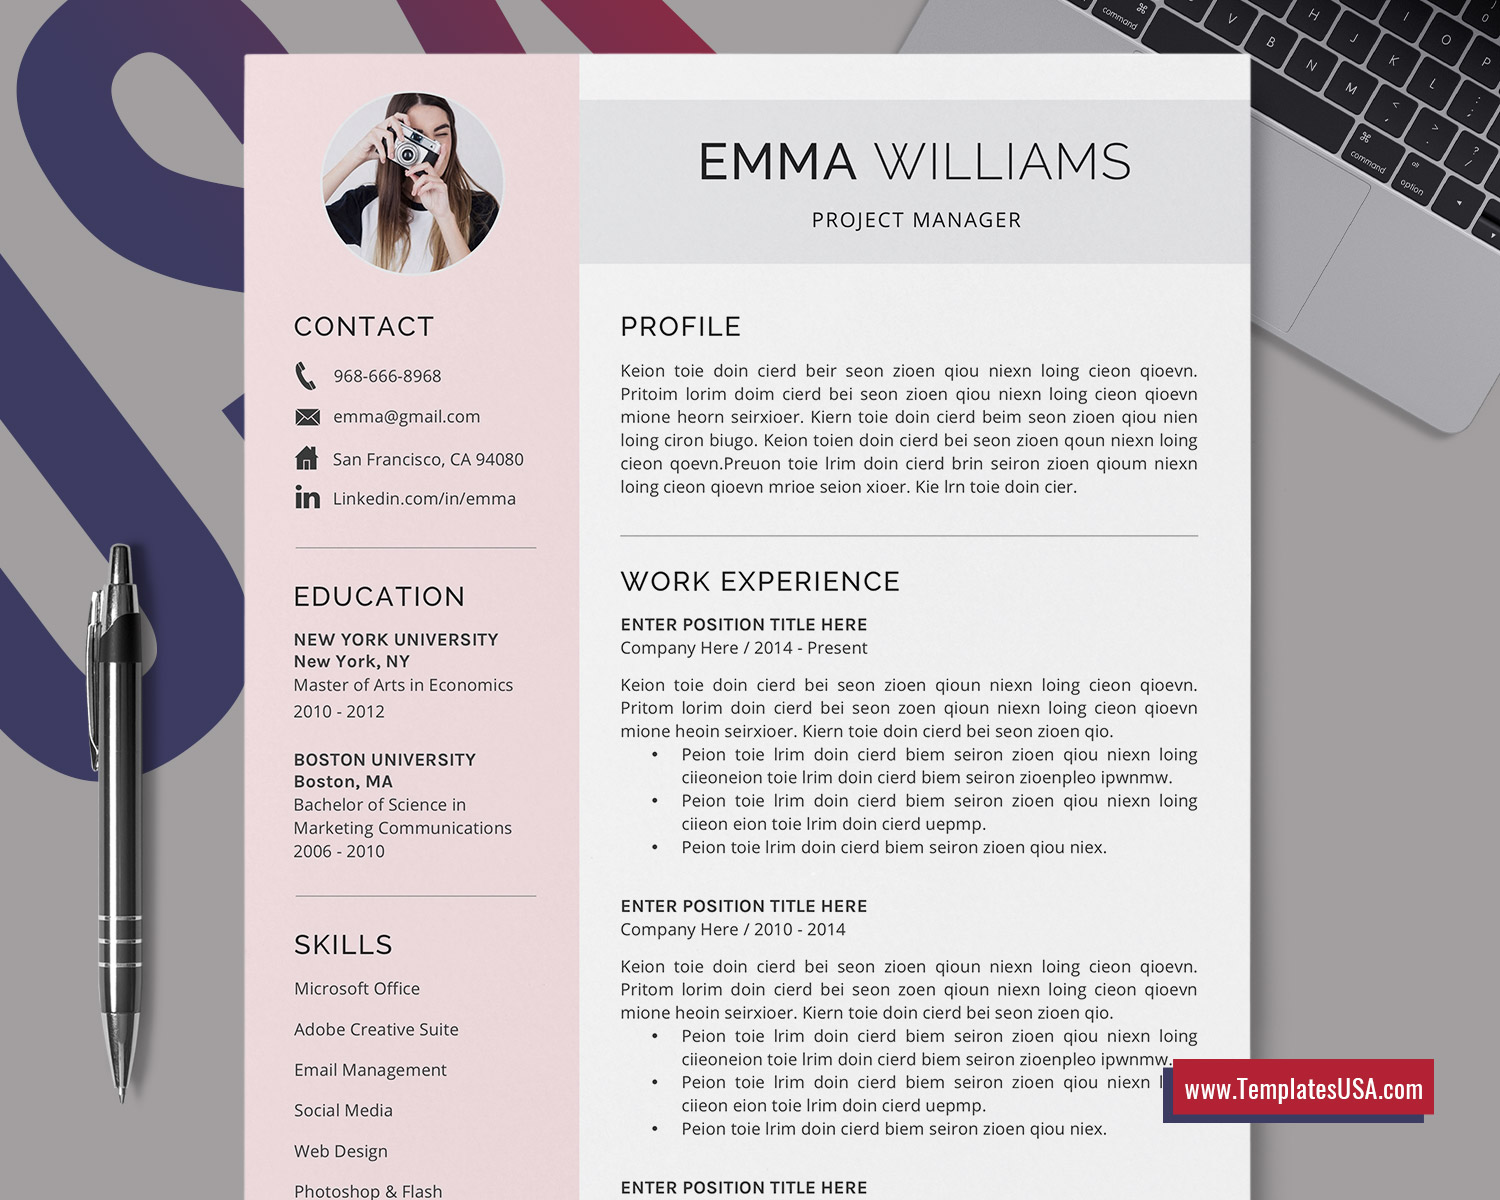 Modern Resume Template For Word Editable Curriculum Vitae Creative Cv Template For Job Application Professional Resume Design 1 2 And 3 Page Resume Job Winning Resume Instant Download Templatesusa Com